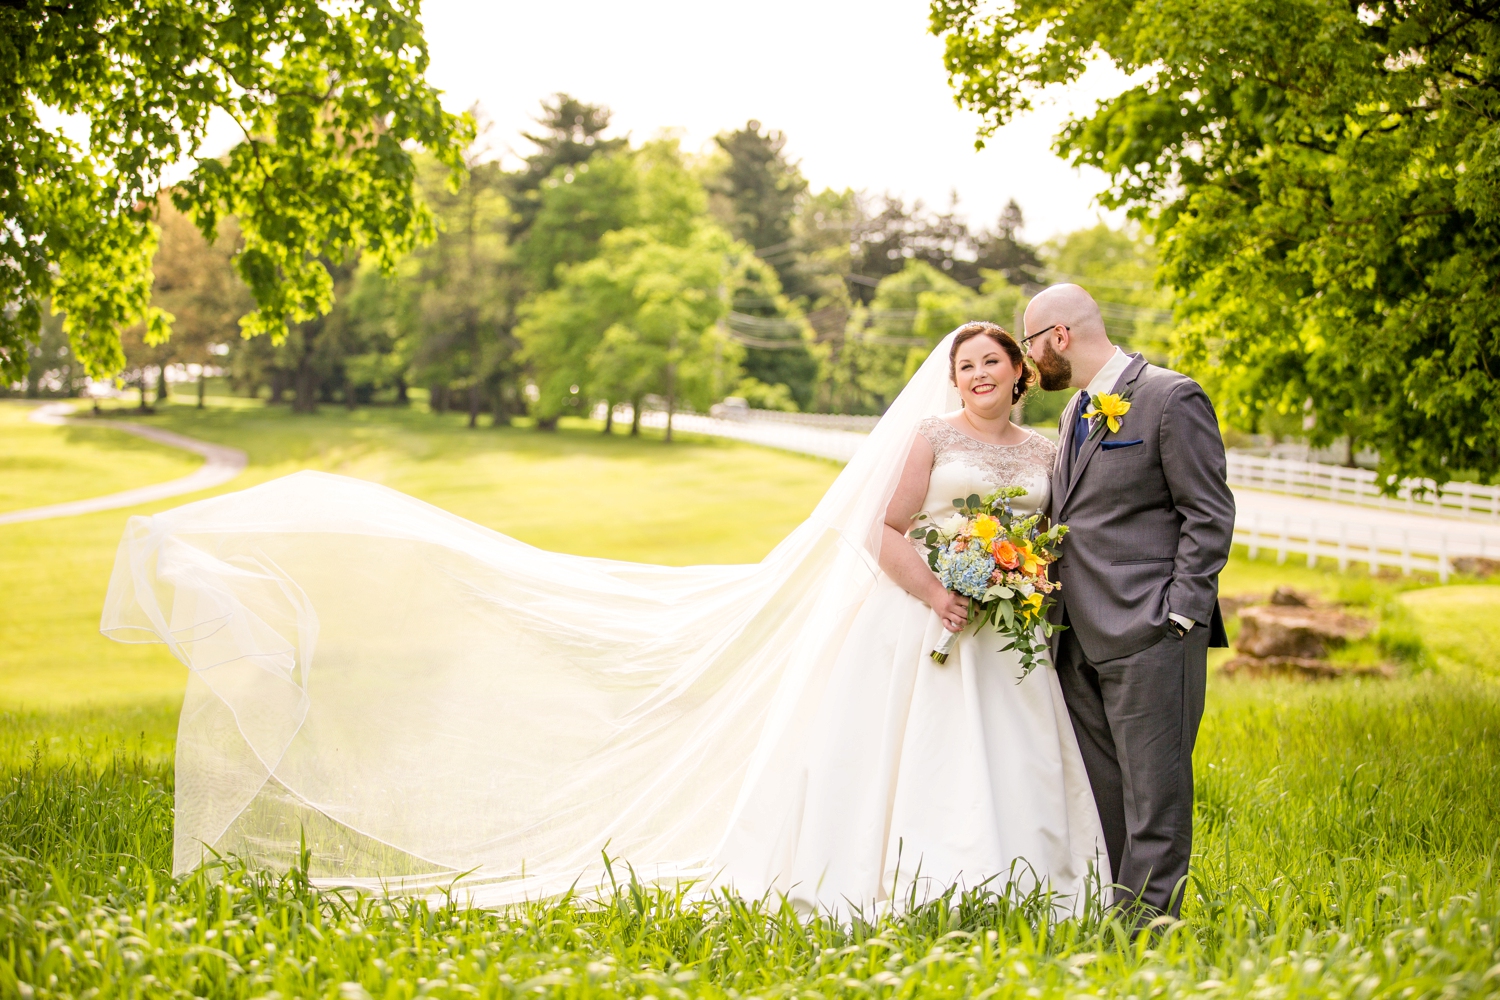 montour heights country club wedding pictures, pittsburgh wedding photographer, pittsburgh engagement photographer, mhcc wedding pictures